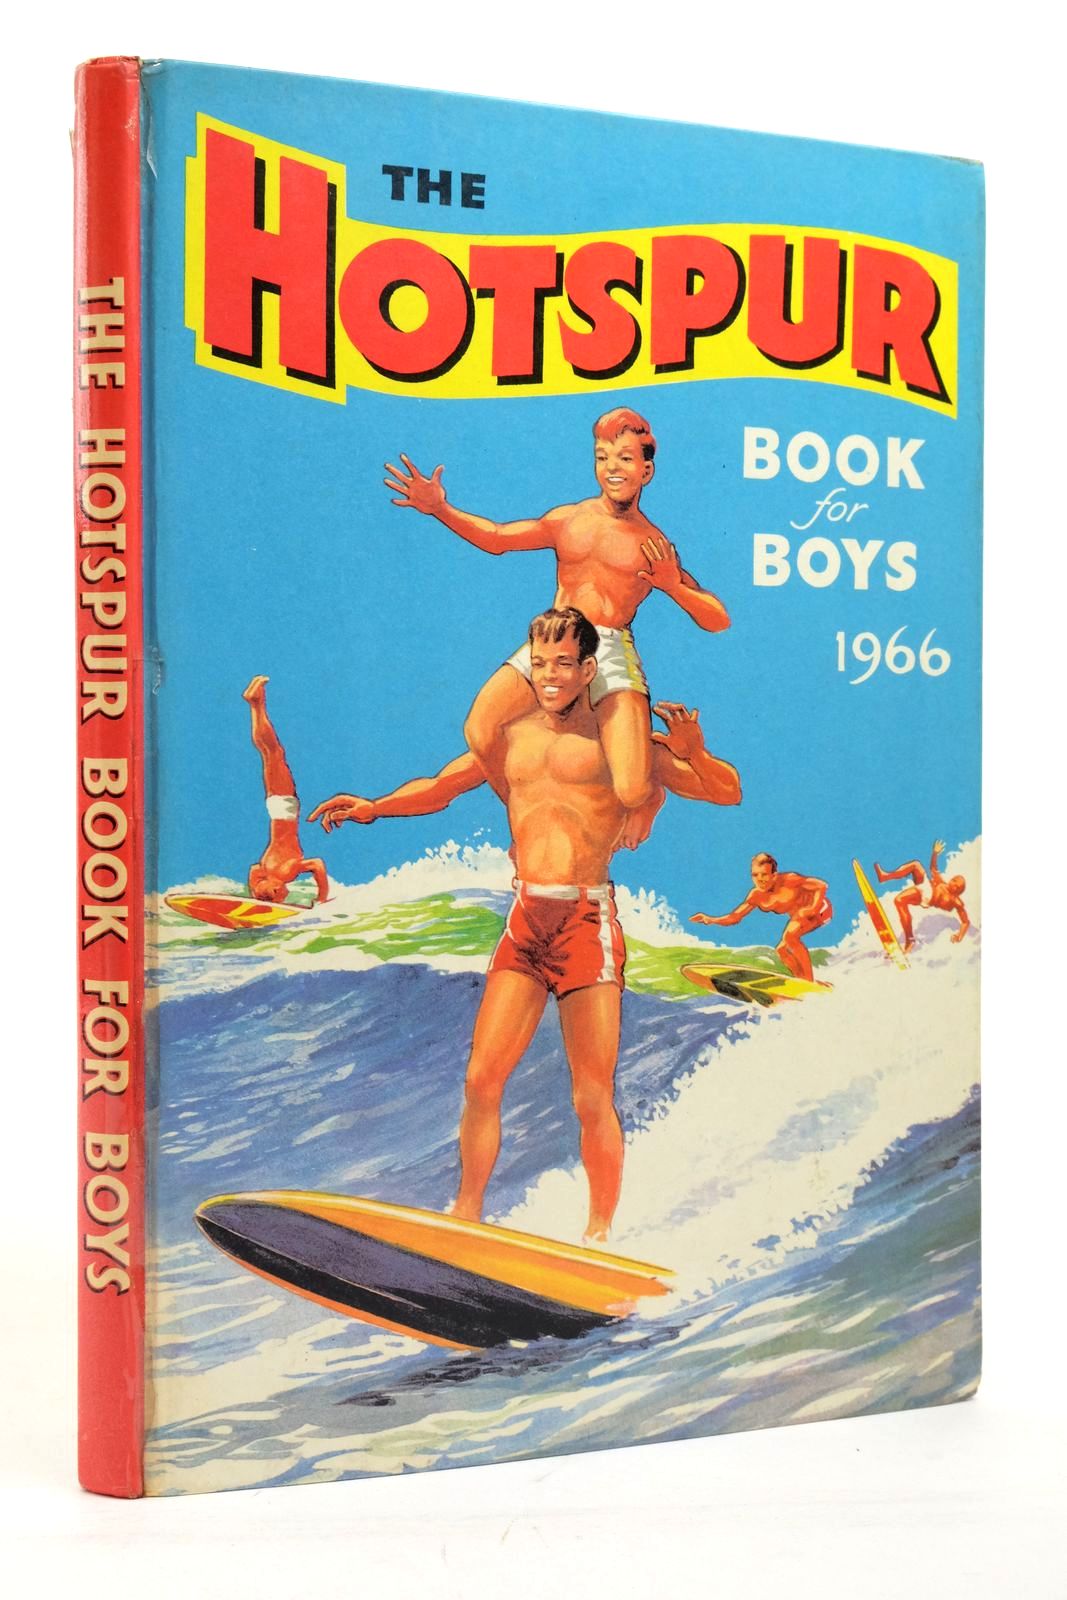 Photo of THE HOTSPUR BOOK FOR BOYS 1966 published by D.C. Thomson &amp; Co Ltd. (STOCK CODE: 2137952)  for sale by Stella & Rose's Books